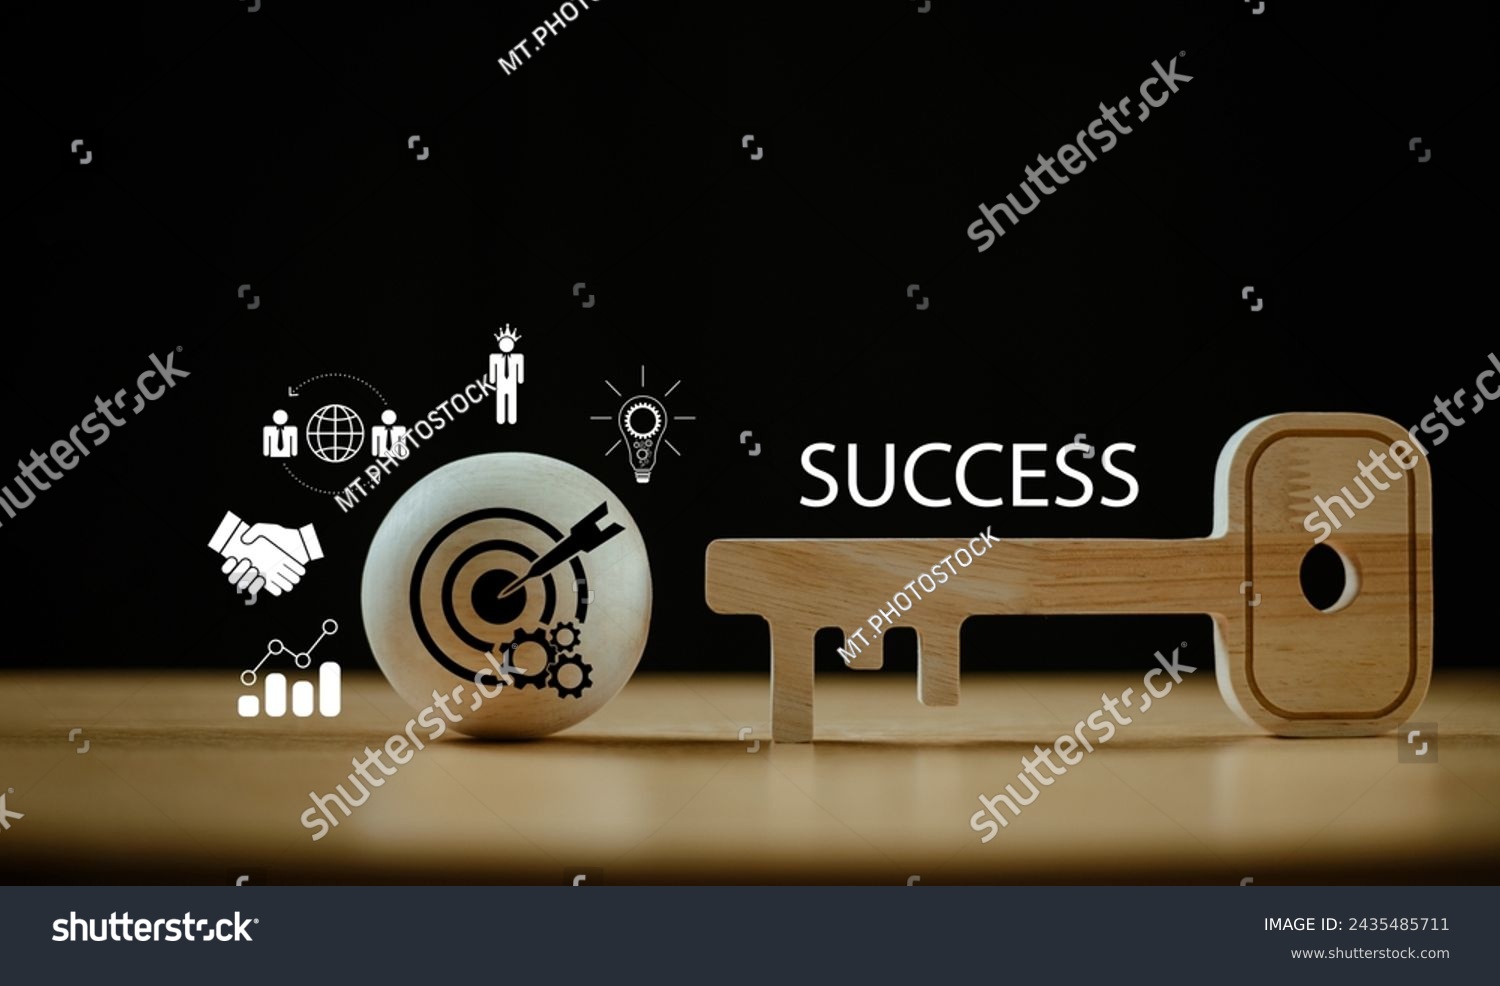 Key strategy idea, business goal concept. Wooden gold key unlock security ball target icon. Key success business planning, creative fund investment consultant. Marketing insight solution for leader #2435485711